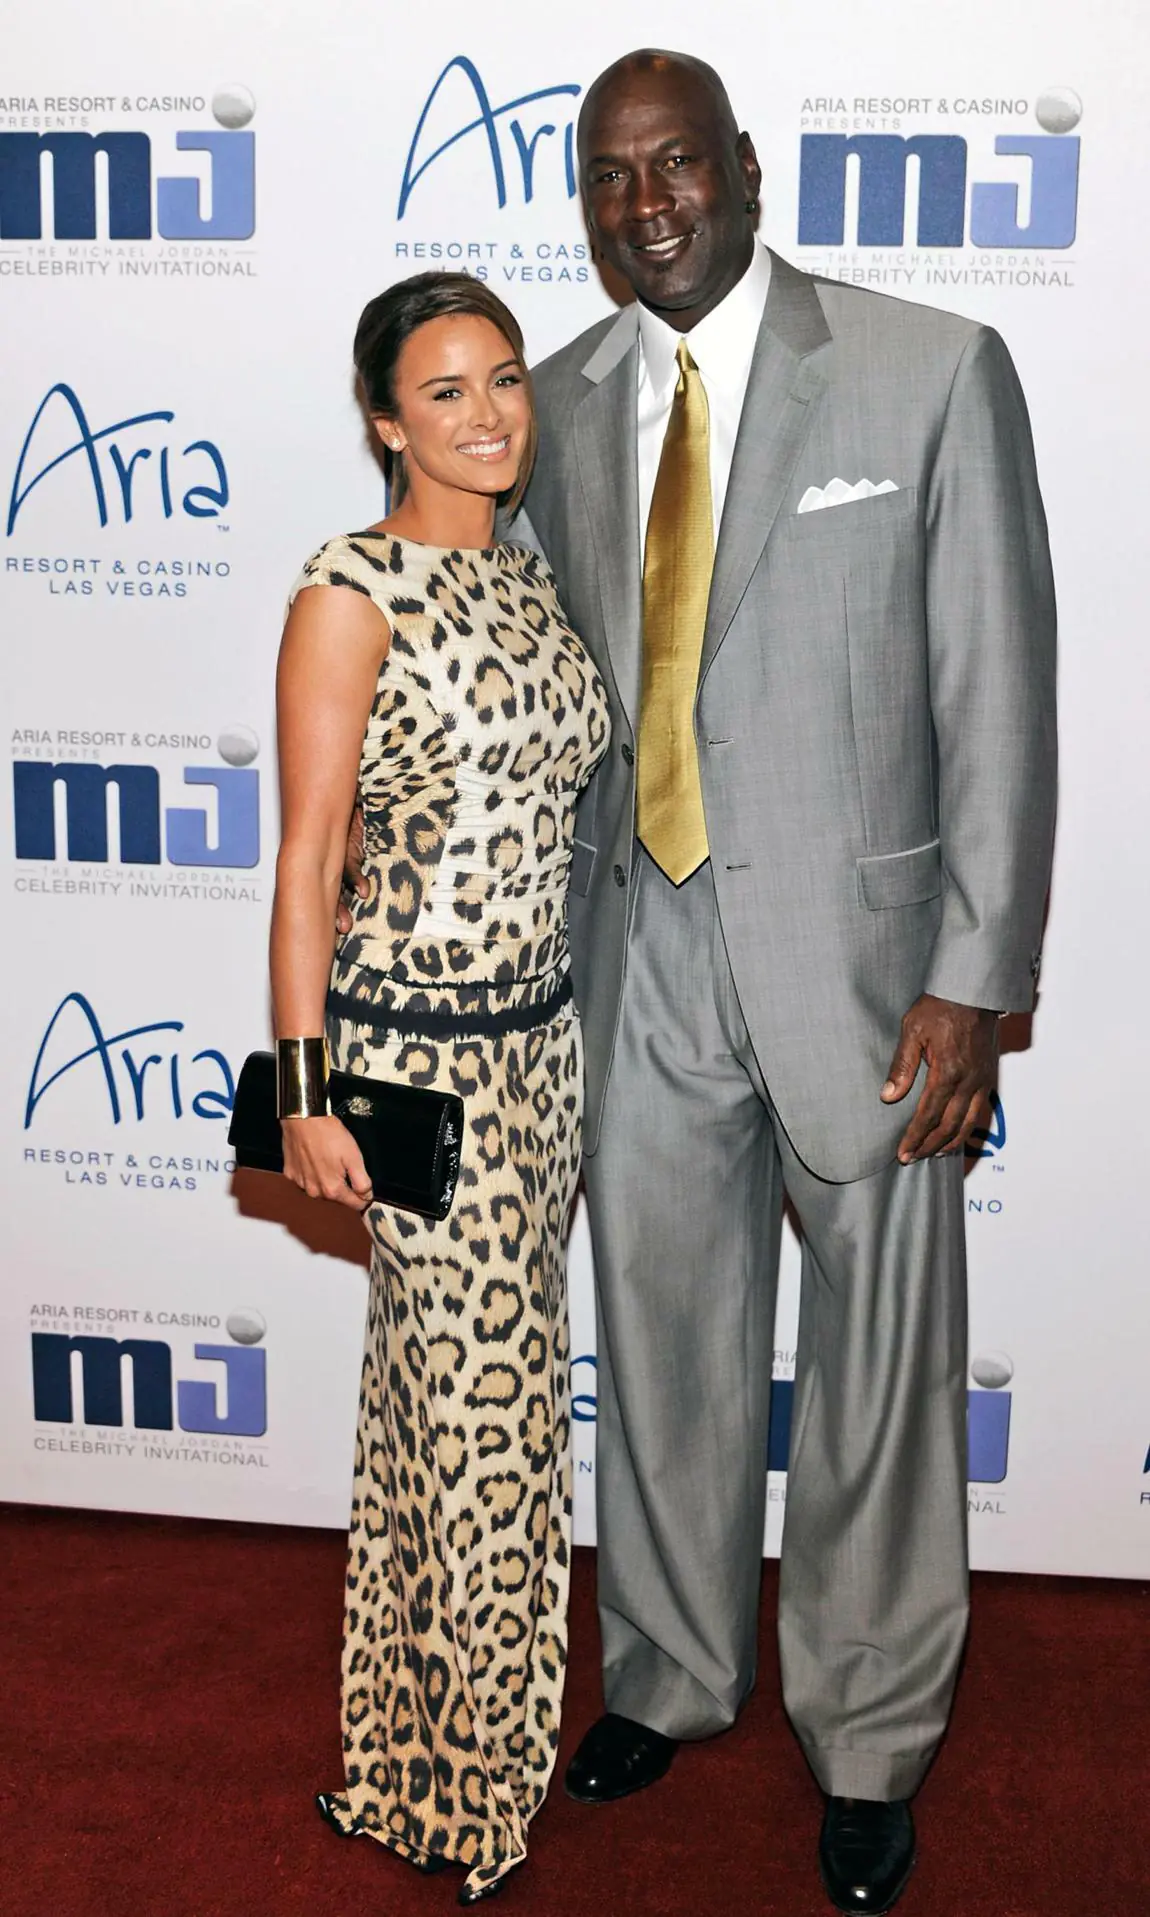 Yvette Prieto And Michael Jordan On The Red Carpet (Source Gettyimages)